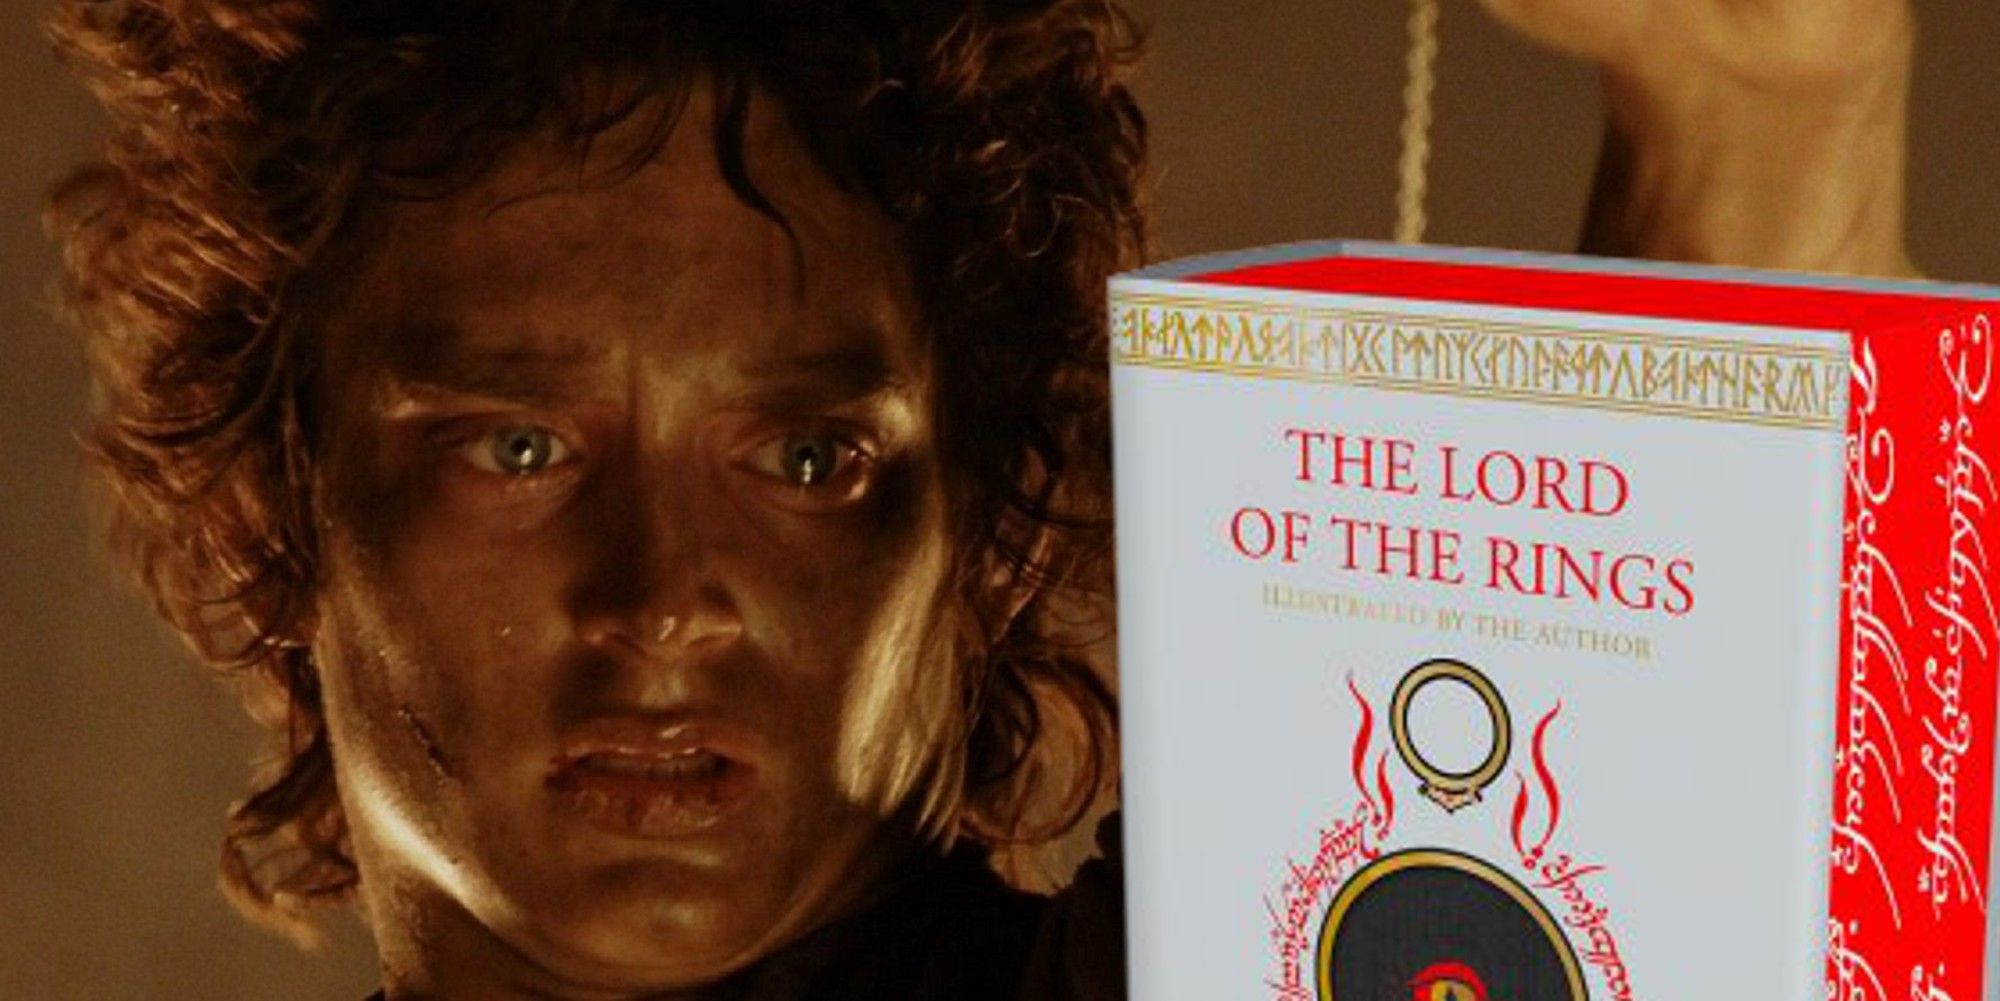 frodo lord of the rings book